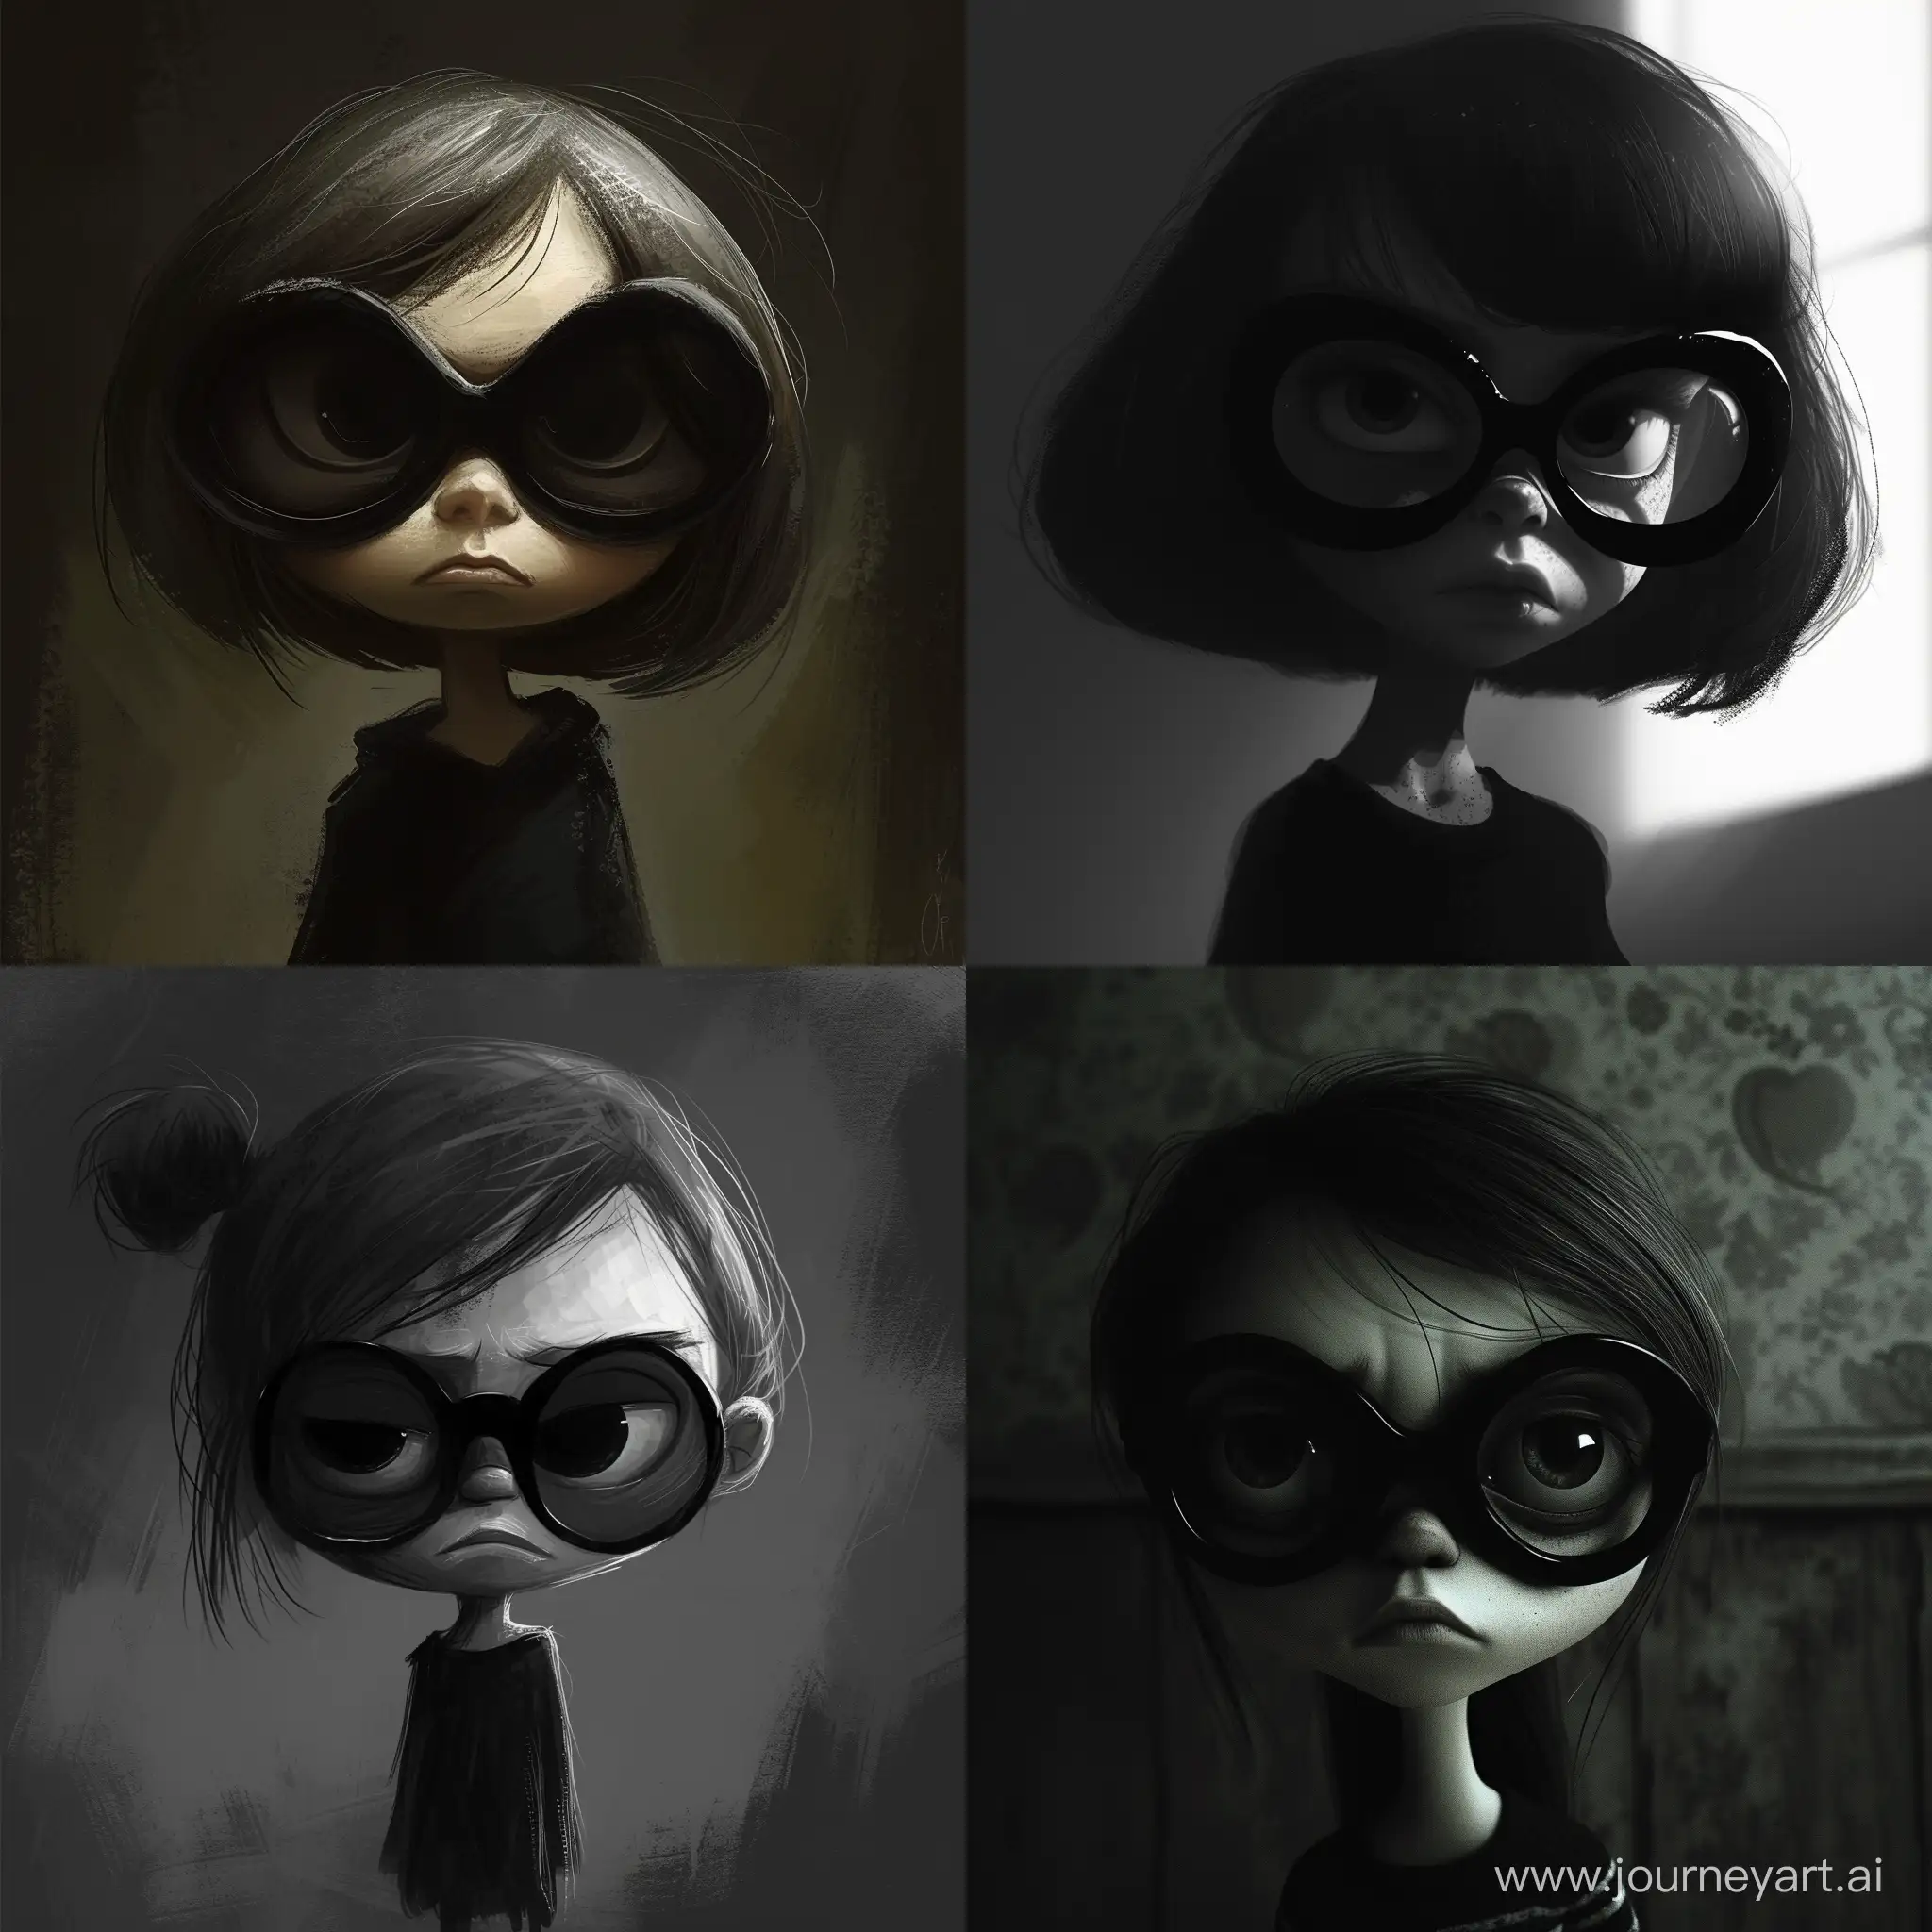 The girl is small and favors wearing dark colors, particularly black, in order to blend into the shadows. Her black glasses give off a foreboding impression, as they appear larger than her face. Though her appearance may come across as frail and vulnerable, there is a dark, brooding intensity hidden in her intense stare.